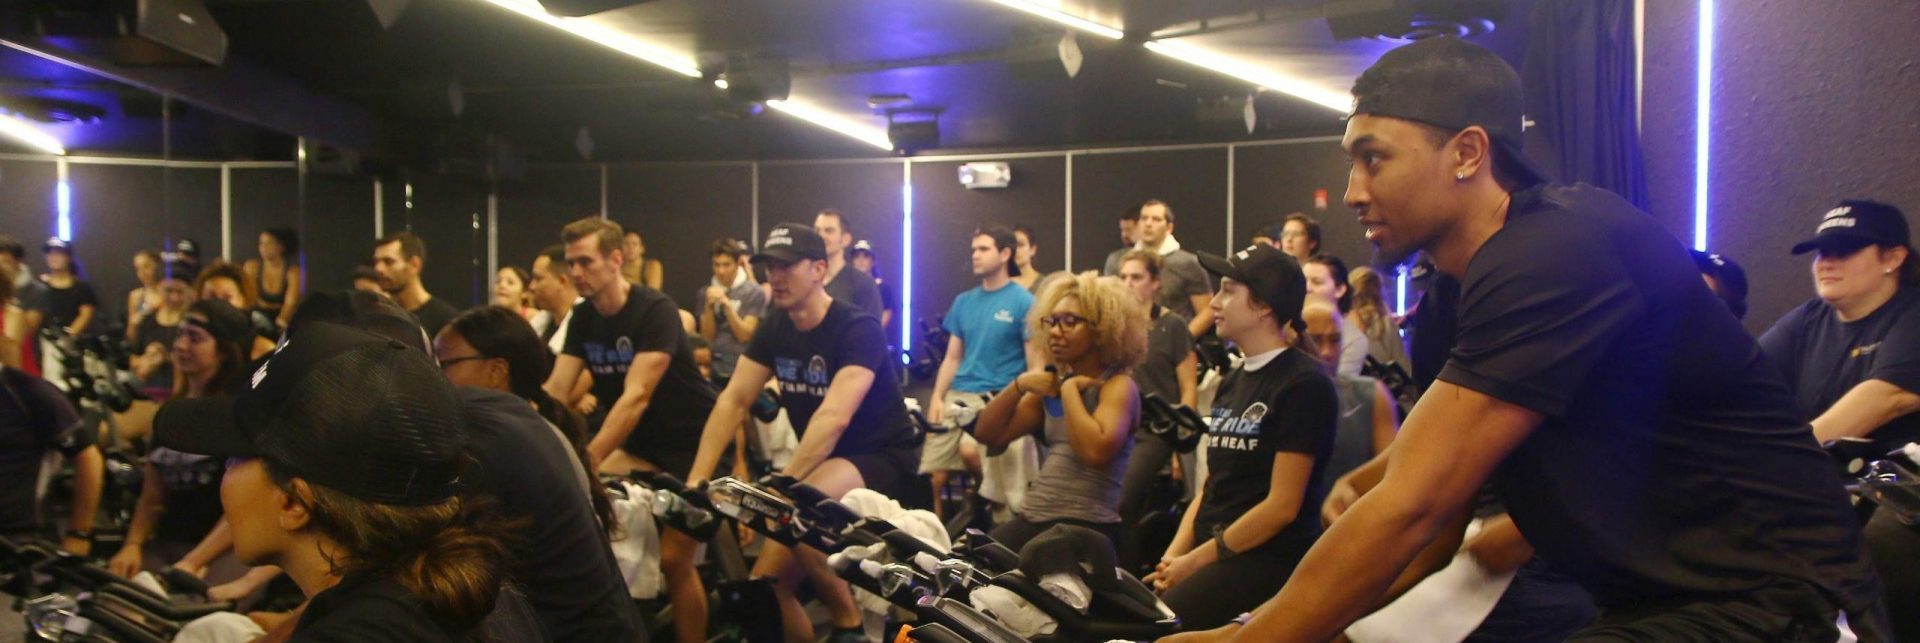 Donors take a spinning class together to raise money for HEAF.